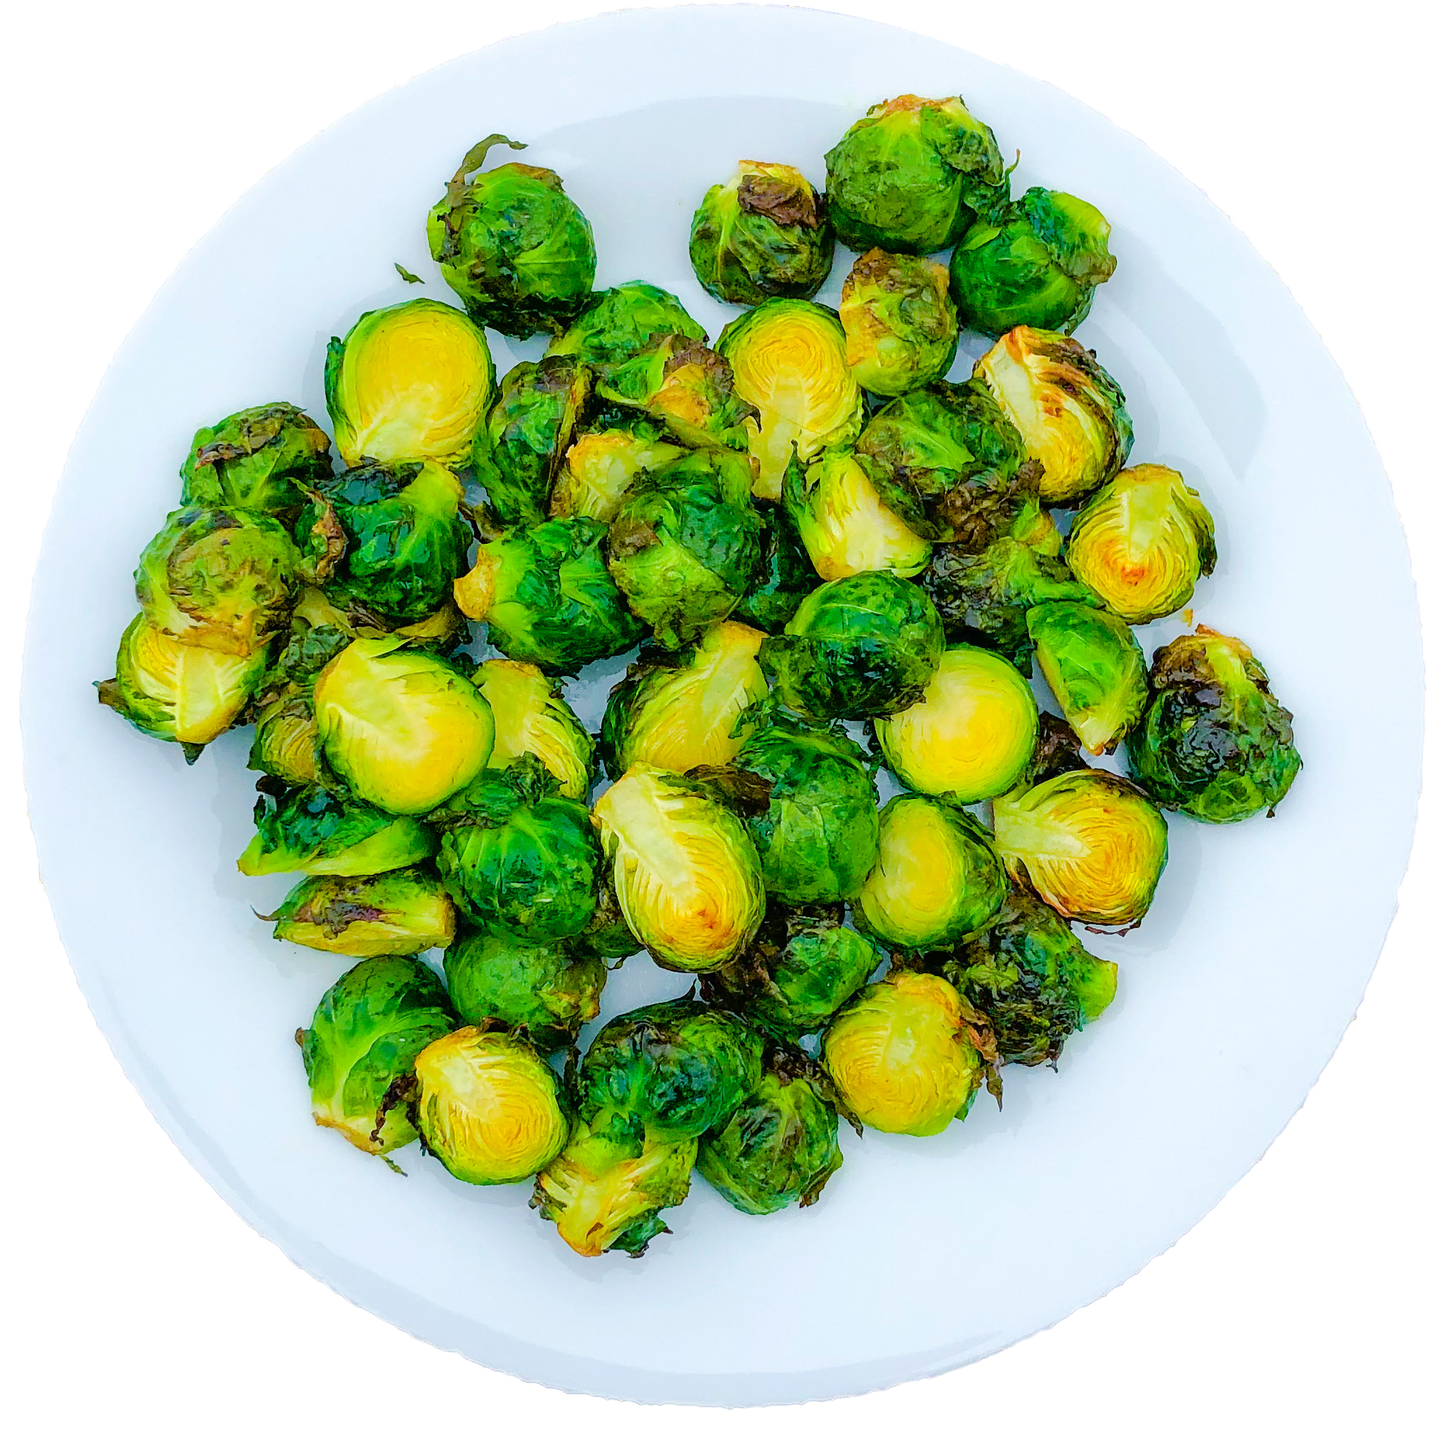 Salt-Free Brussel Sprouts (1 pound)